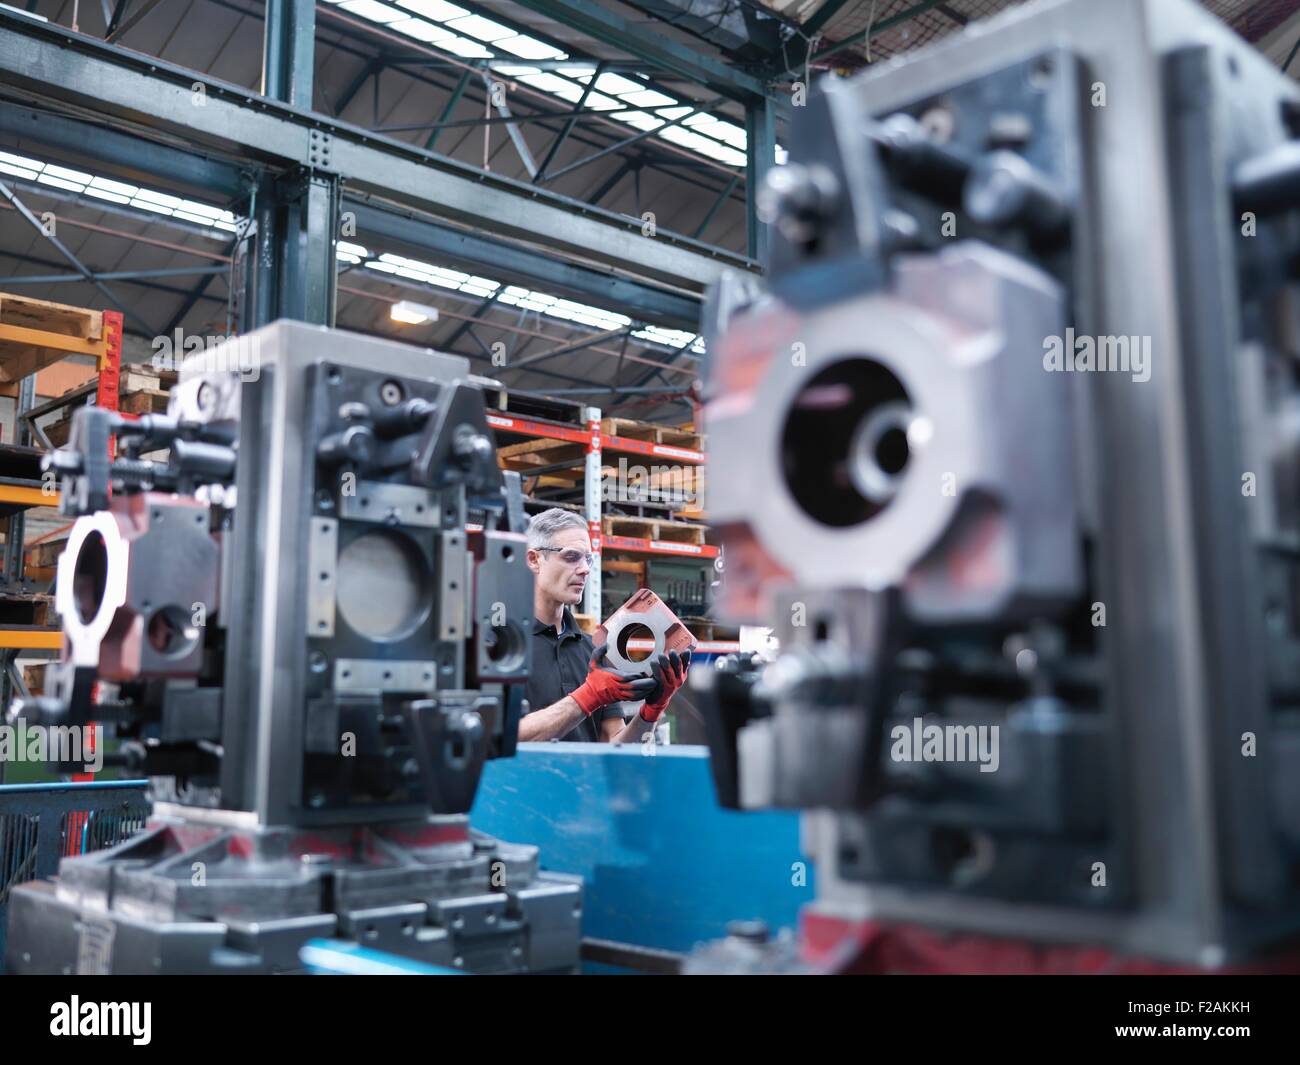 Engineer inspecting parts on automatic lathe in engineering factory Stock Photo